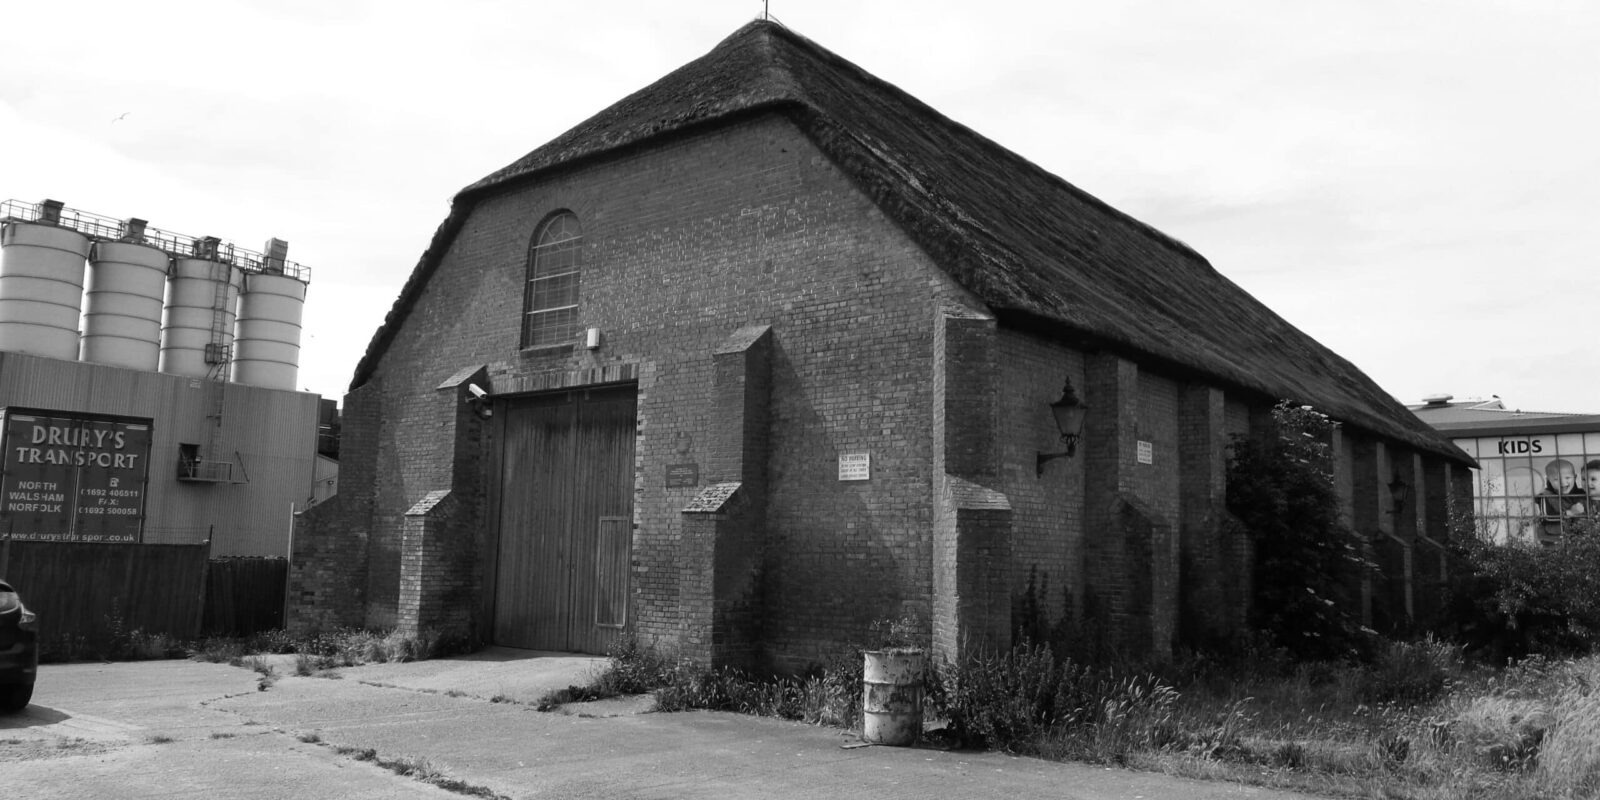 A black and white image of The Ice House in modern times. Situated in Great Yarmouth. A large oblong building with a thatched roof